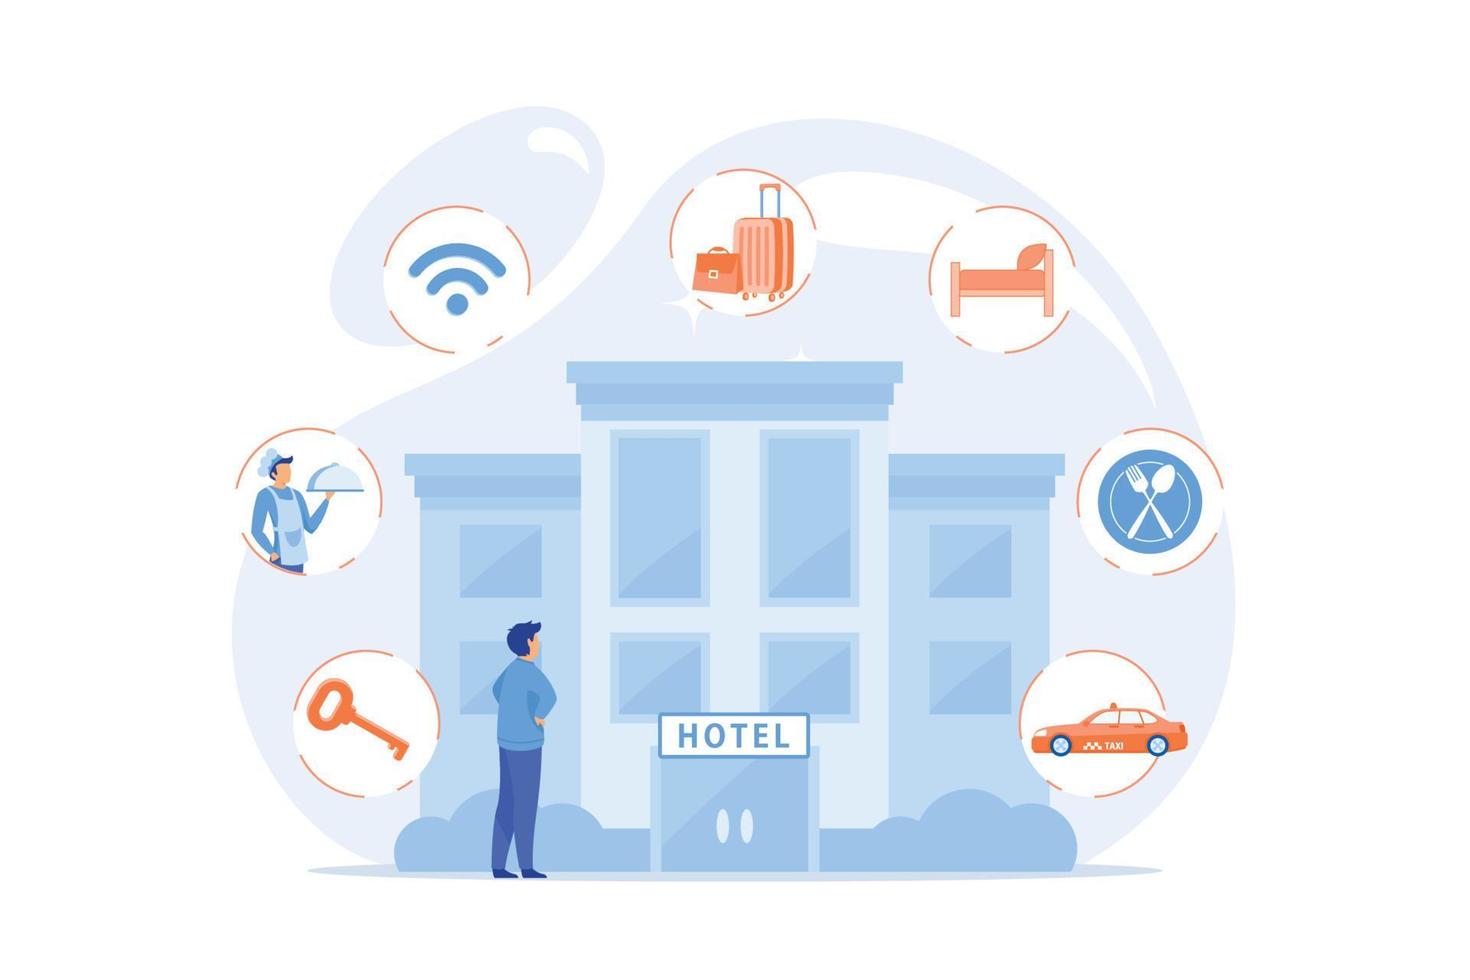 Luxurious inn, accommodation booking. Free wifi, room cleaning. Hospitality management, hotels business processes, hotel management system concept. flat vector modern illustration